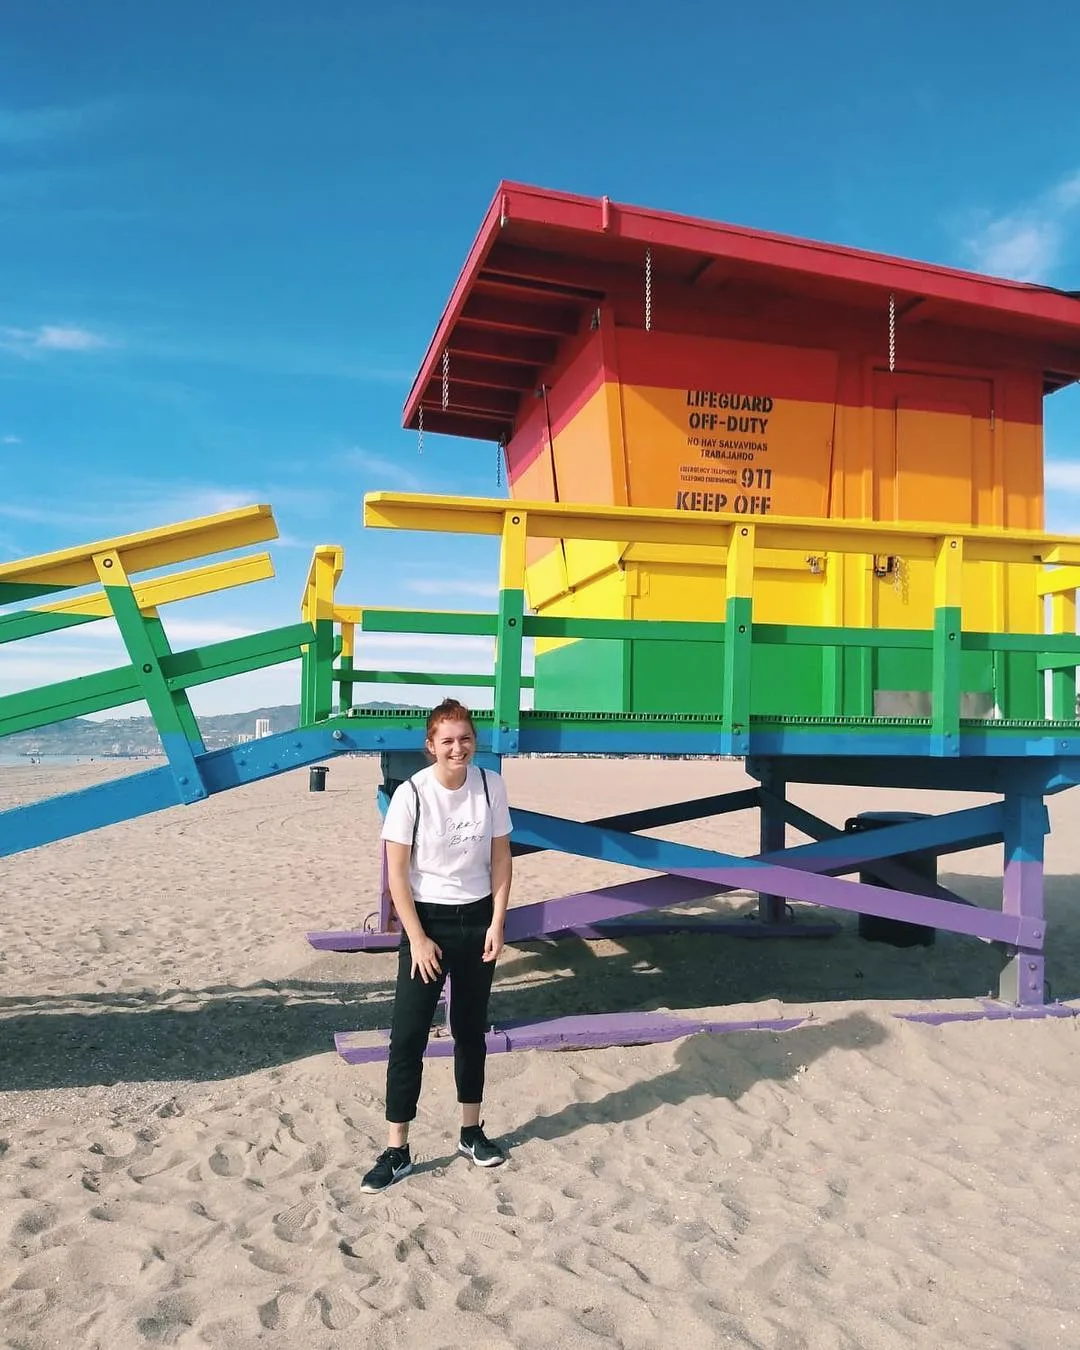 Venice Pride Lifeguard Tower in Los Angeles with lesbian local Esmee